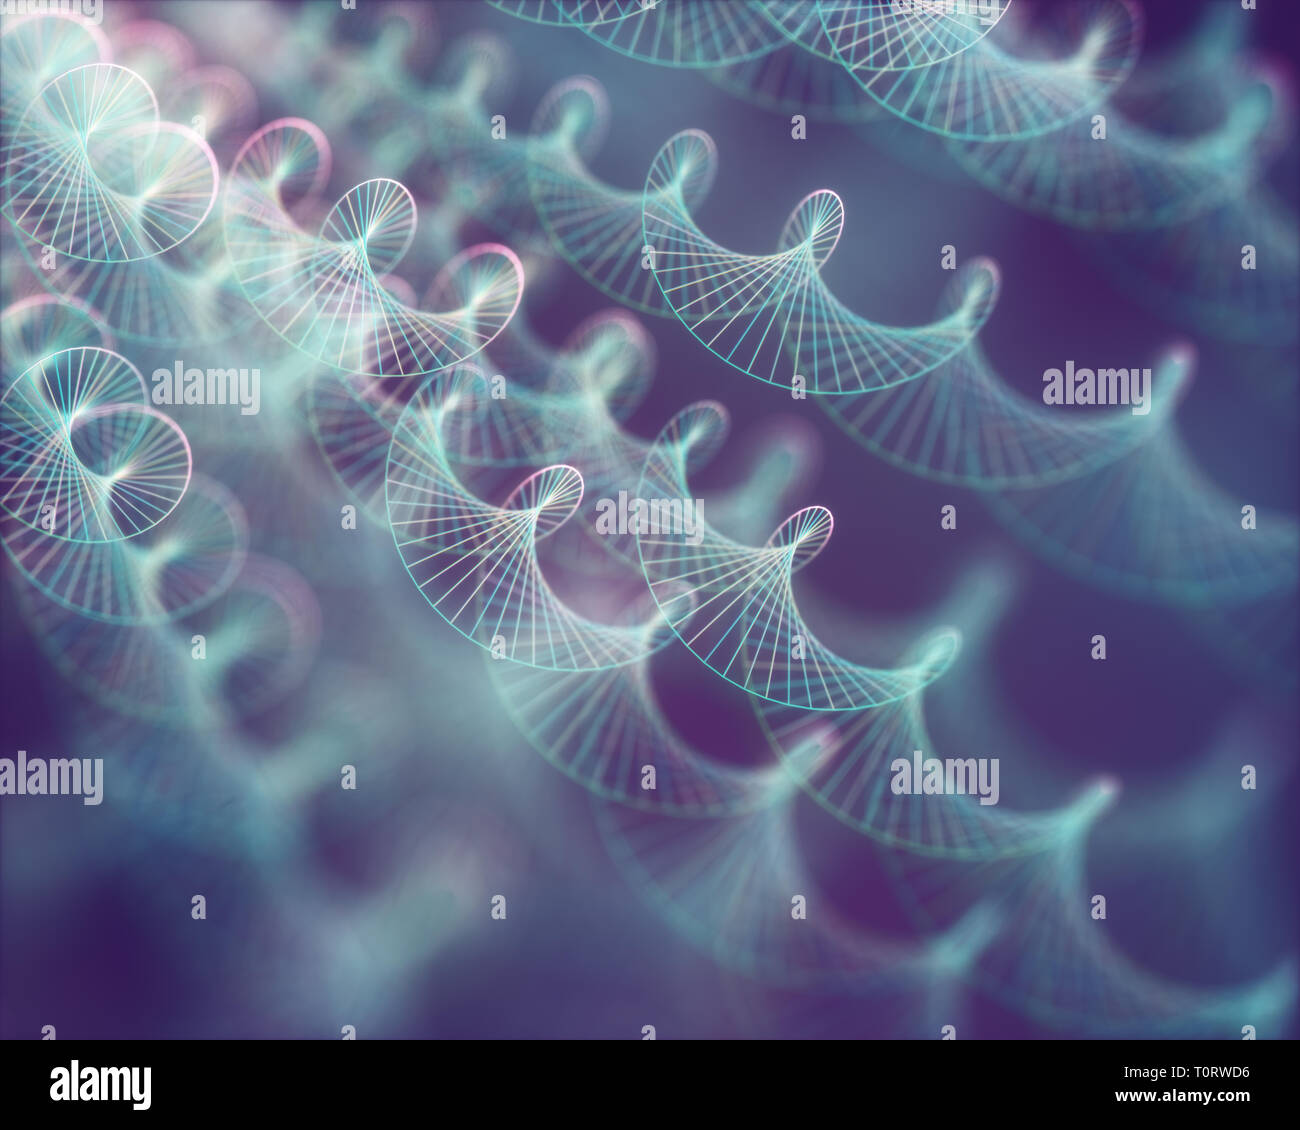 Image of genetic codes DNA. Concept image for use as background. Colored 3D illustration. Stock Photo